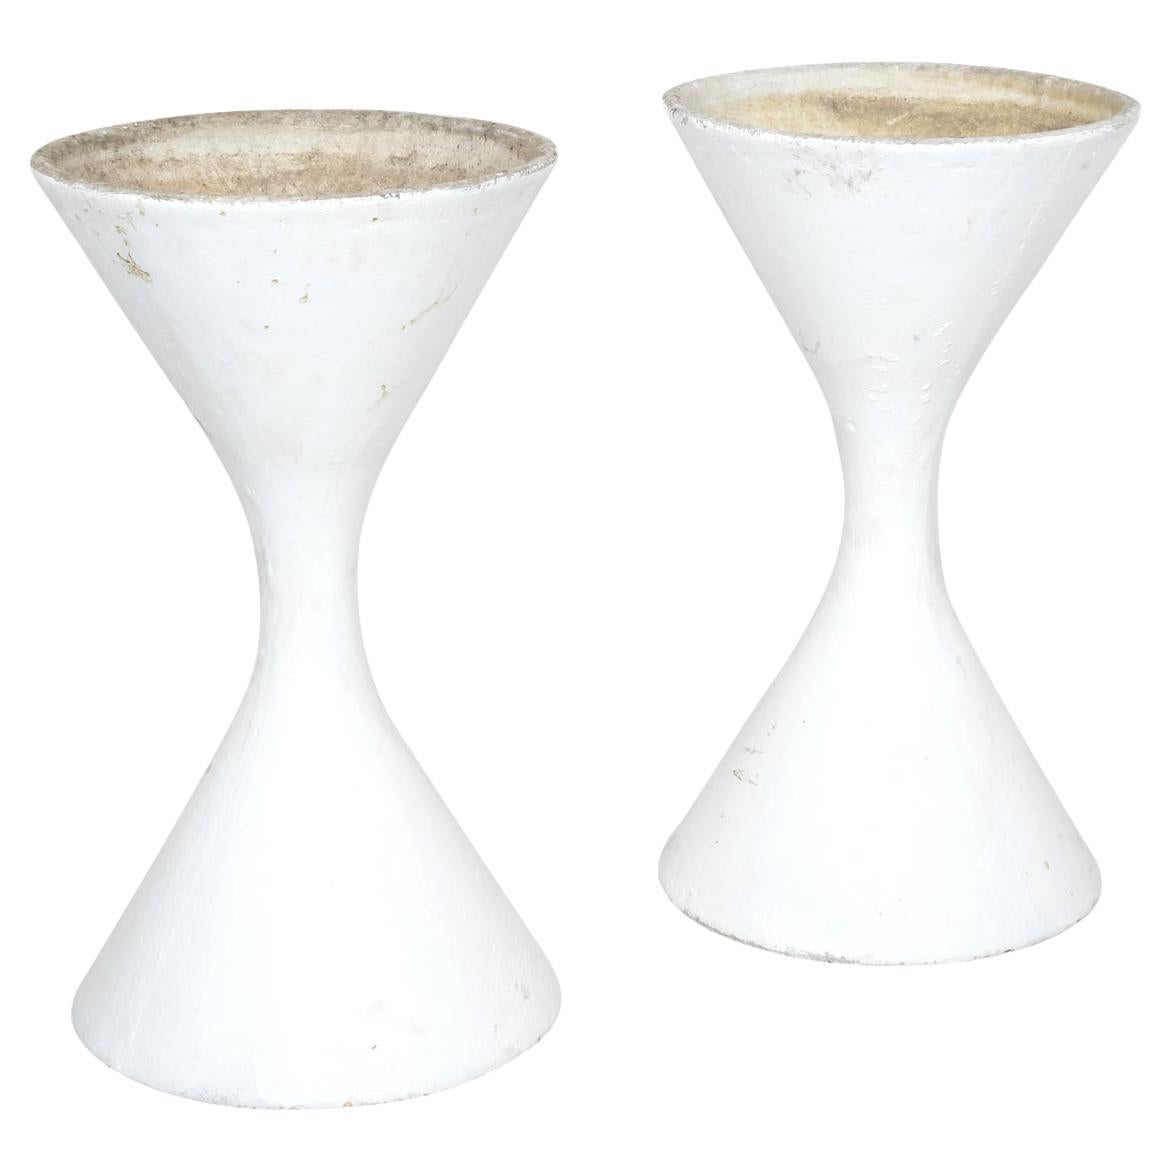  Pair of Mid-Century Modern Willy Guhl X-Large Hourglass Diablo Planters For Sale